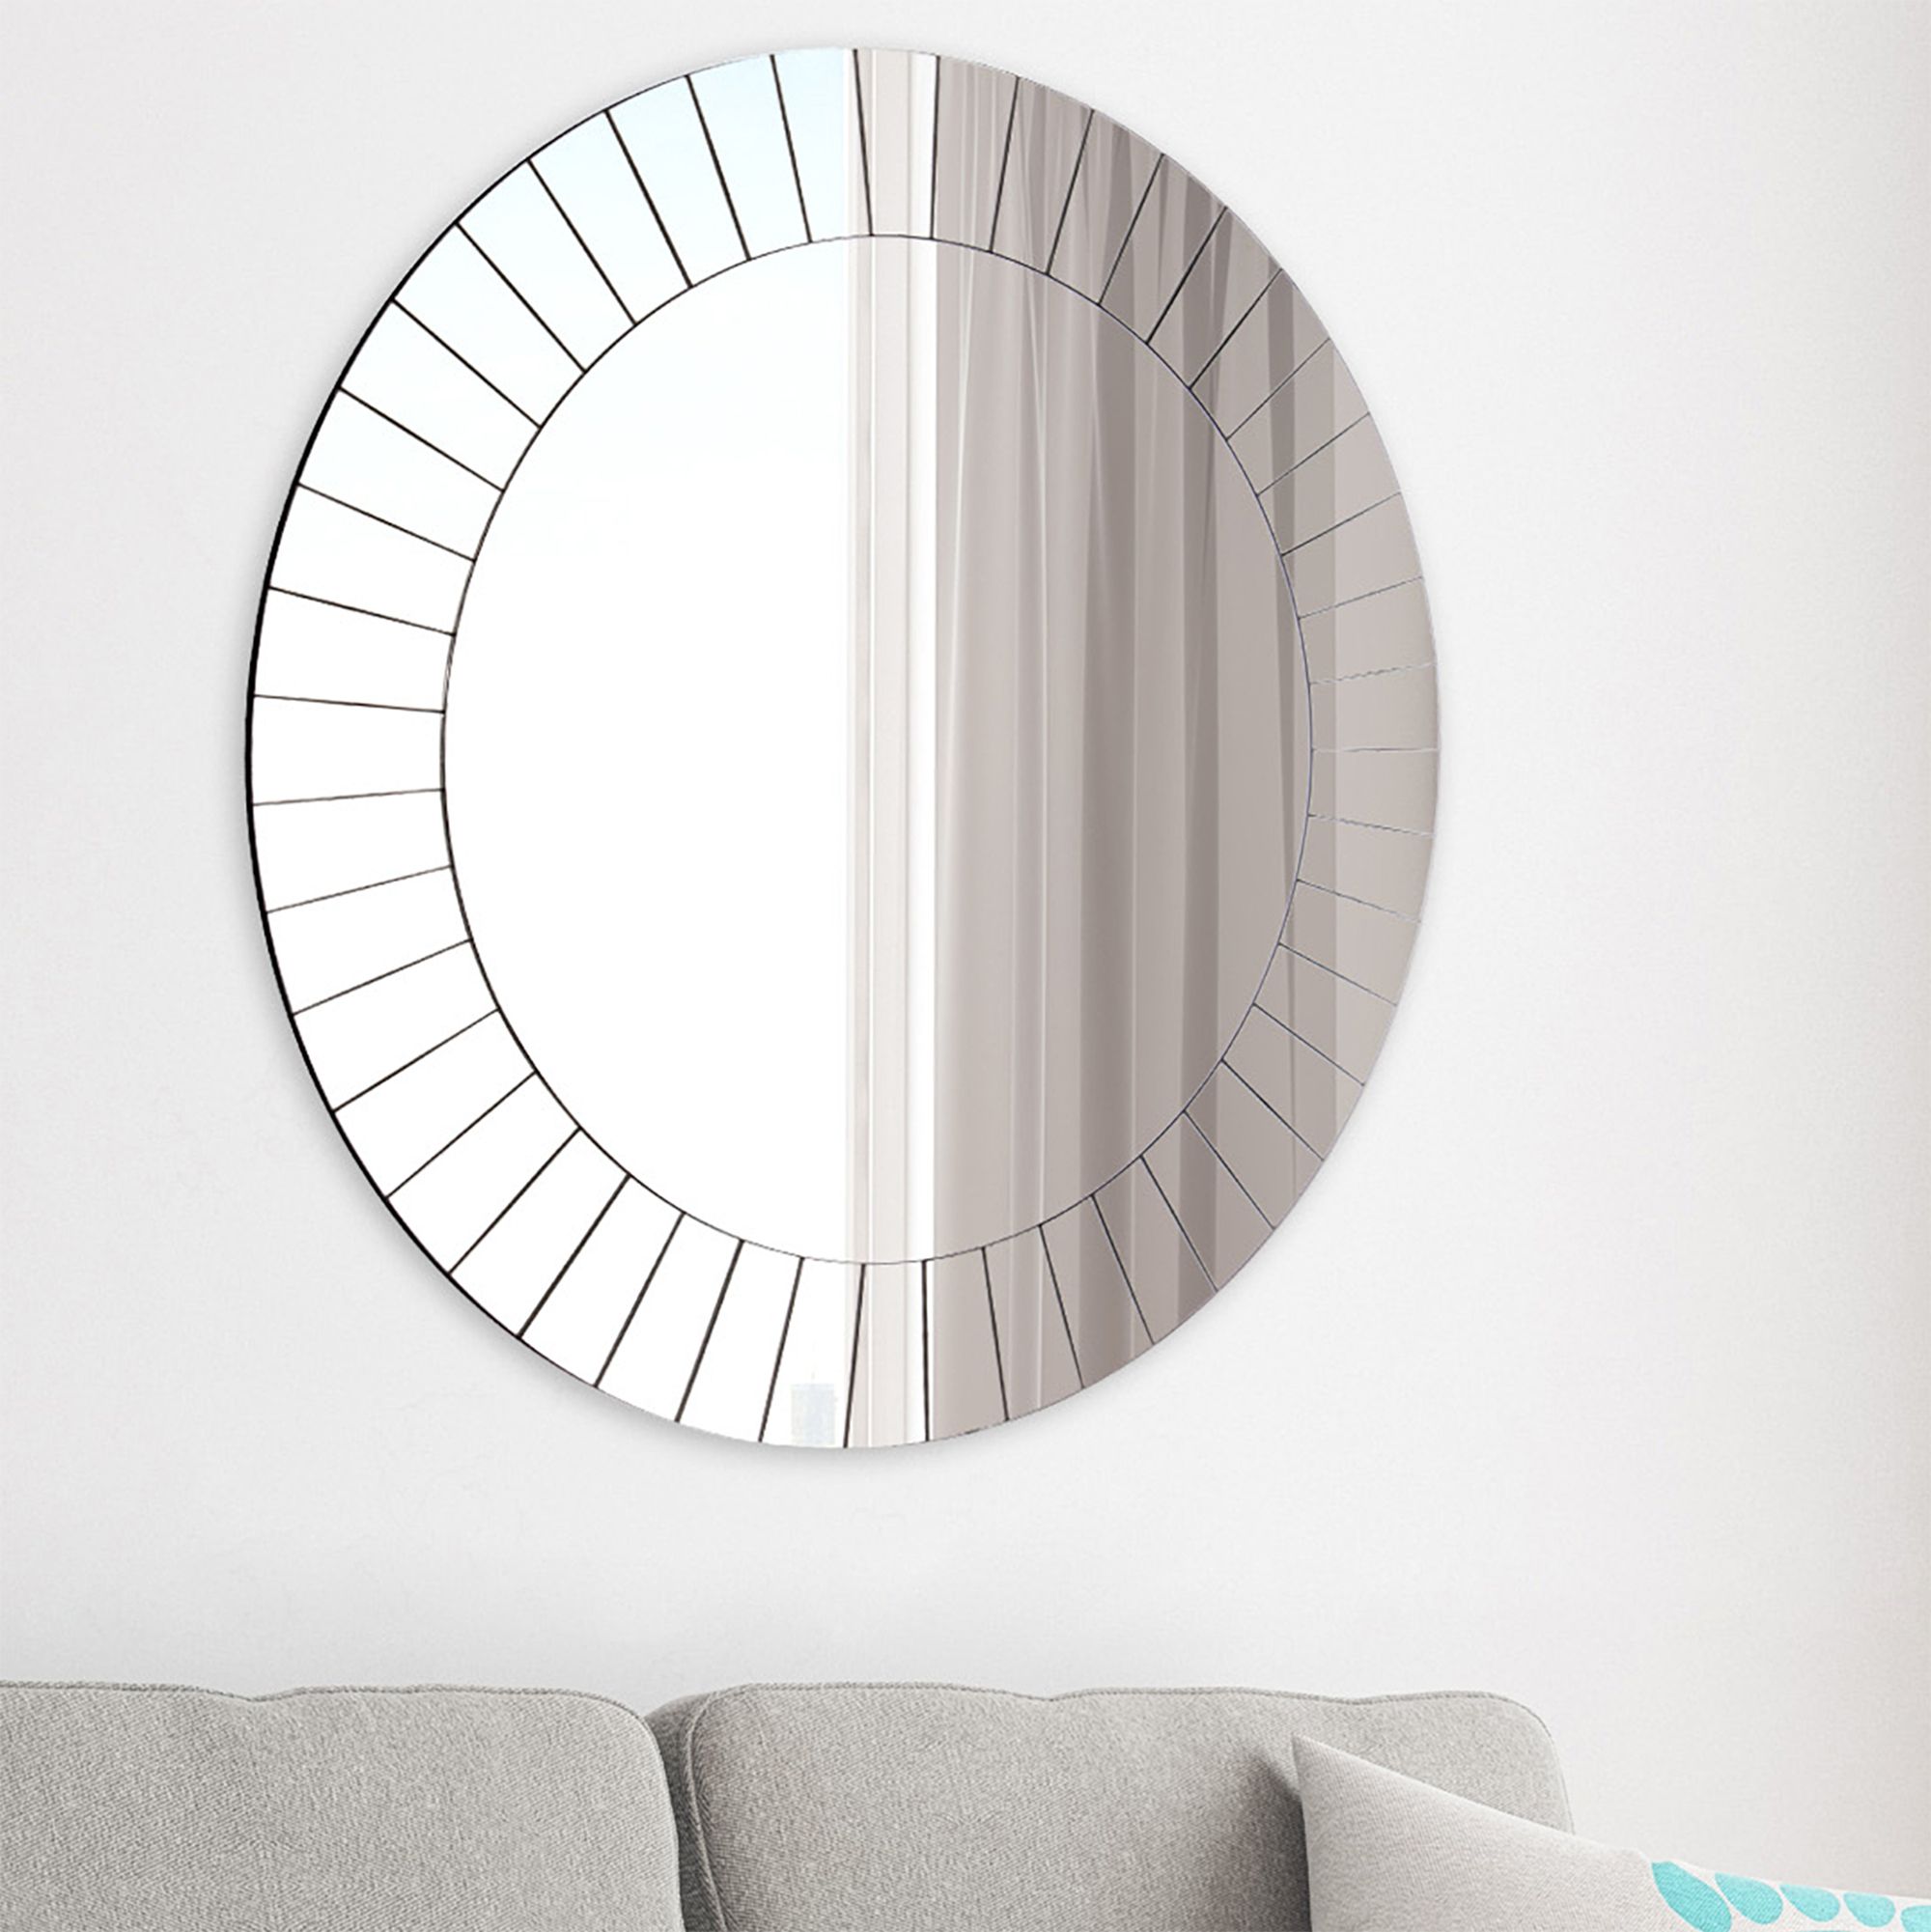 Frameless Beveled Round Wall Mirror 26"x26"gallery Solutions Regarding Shiny Black Round Wall Mirrors (View 3 of 15)